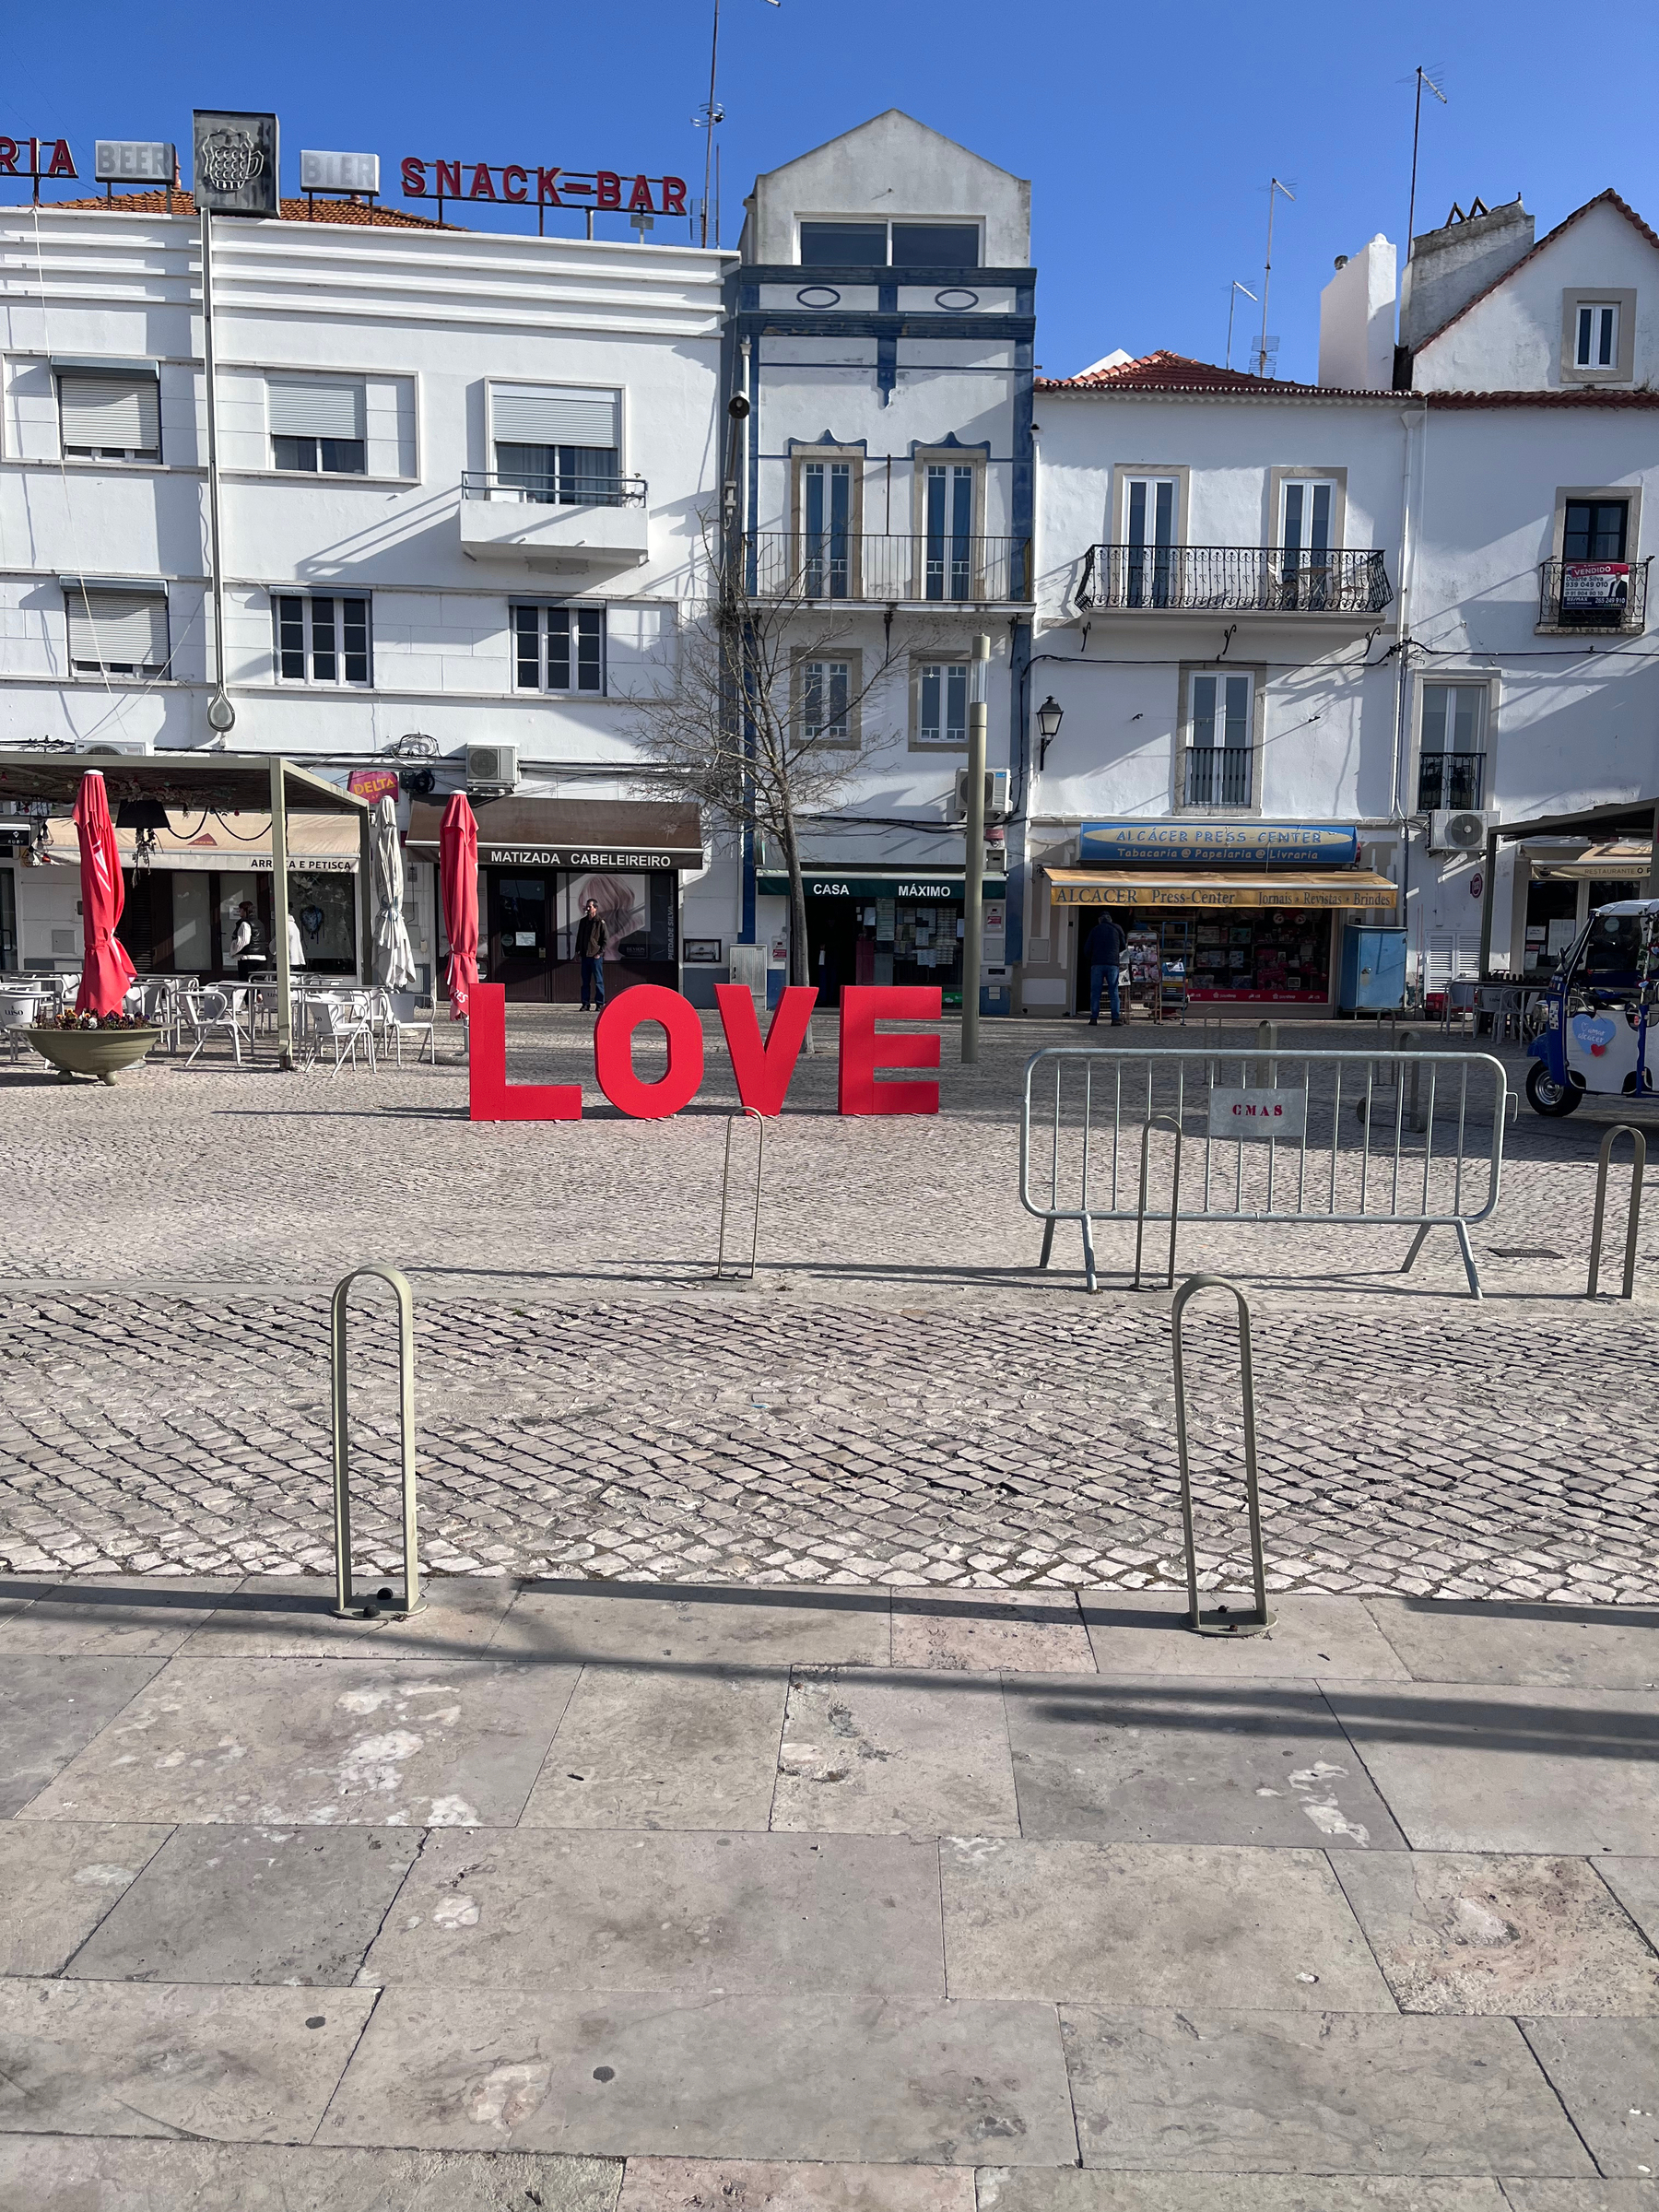 LOVE sign by Alcacer do Sal river front cafes